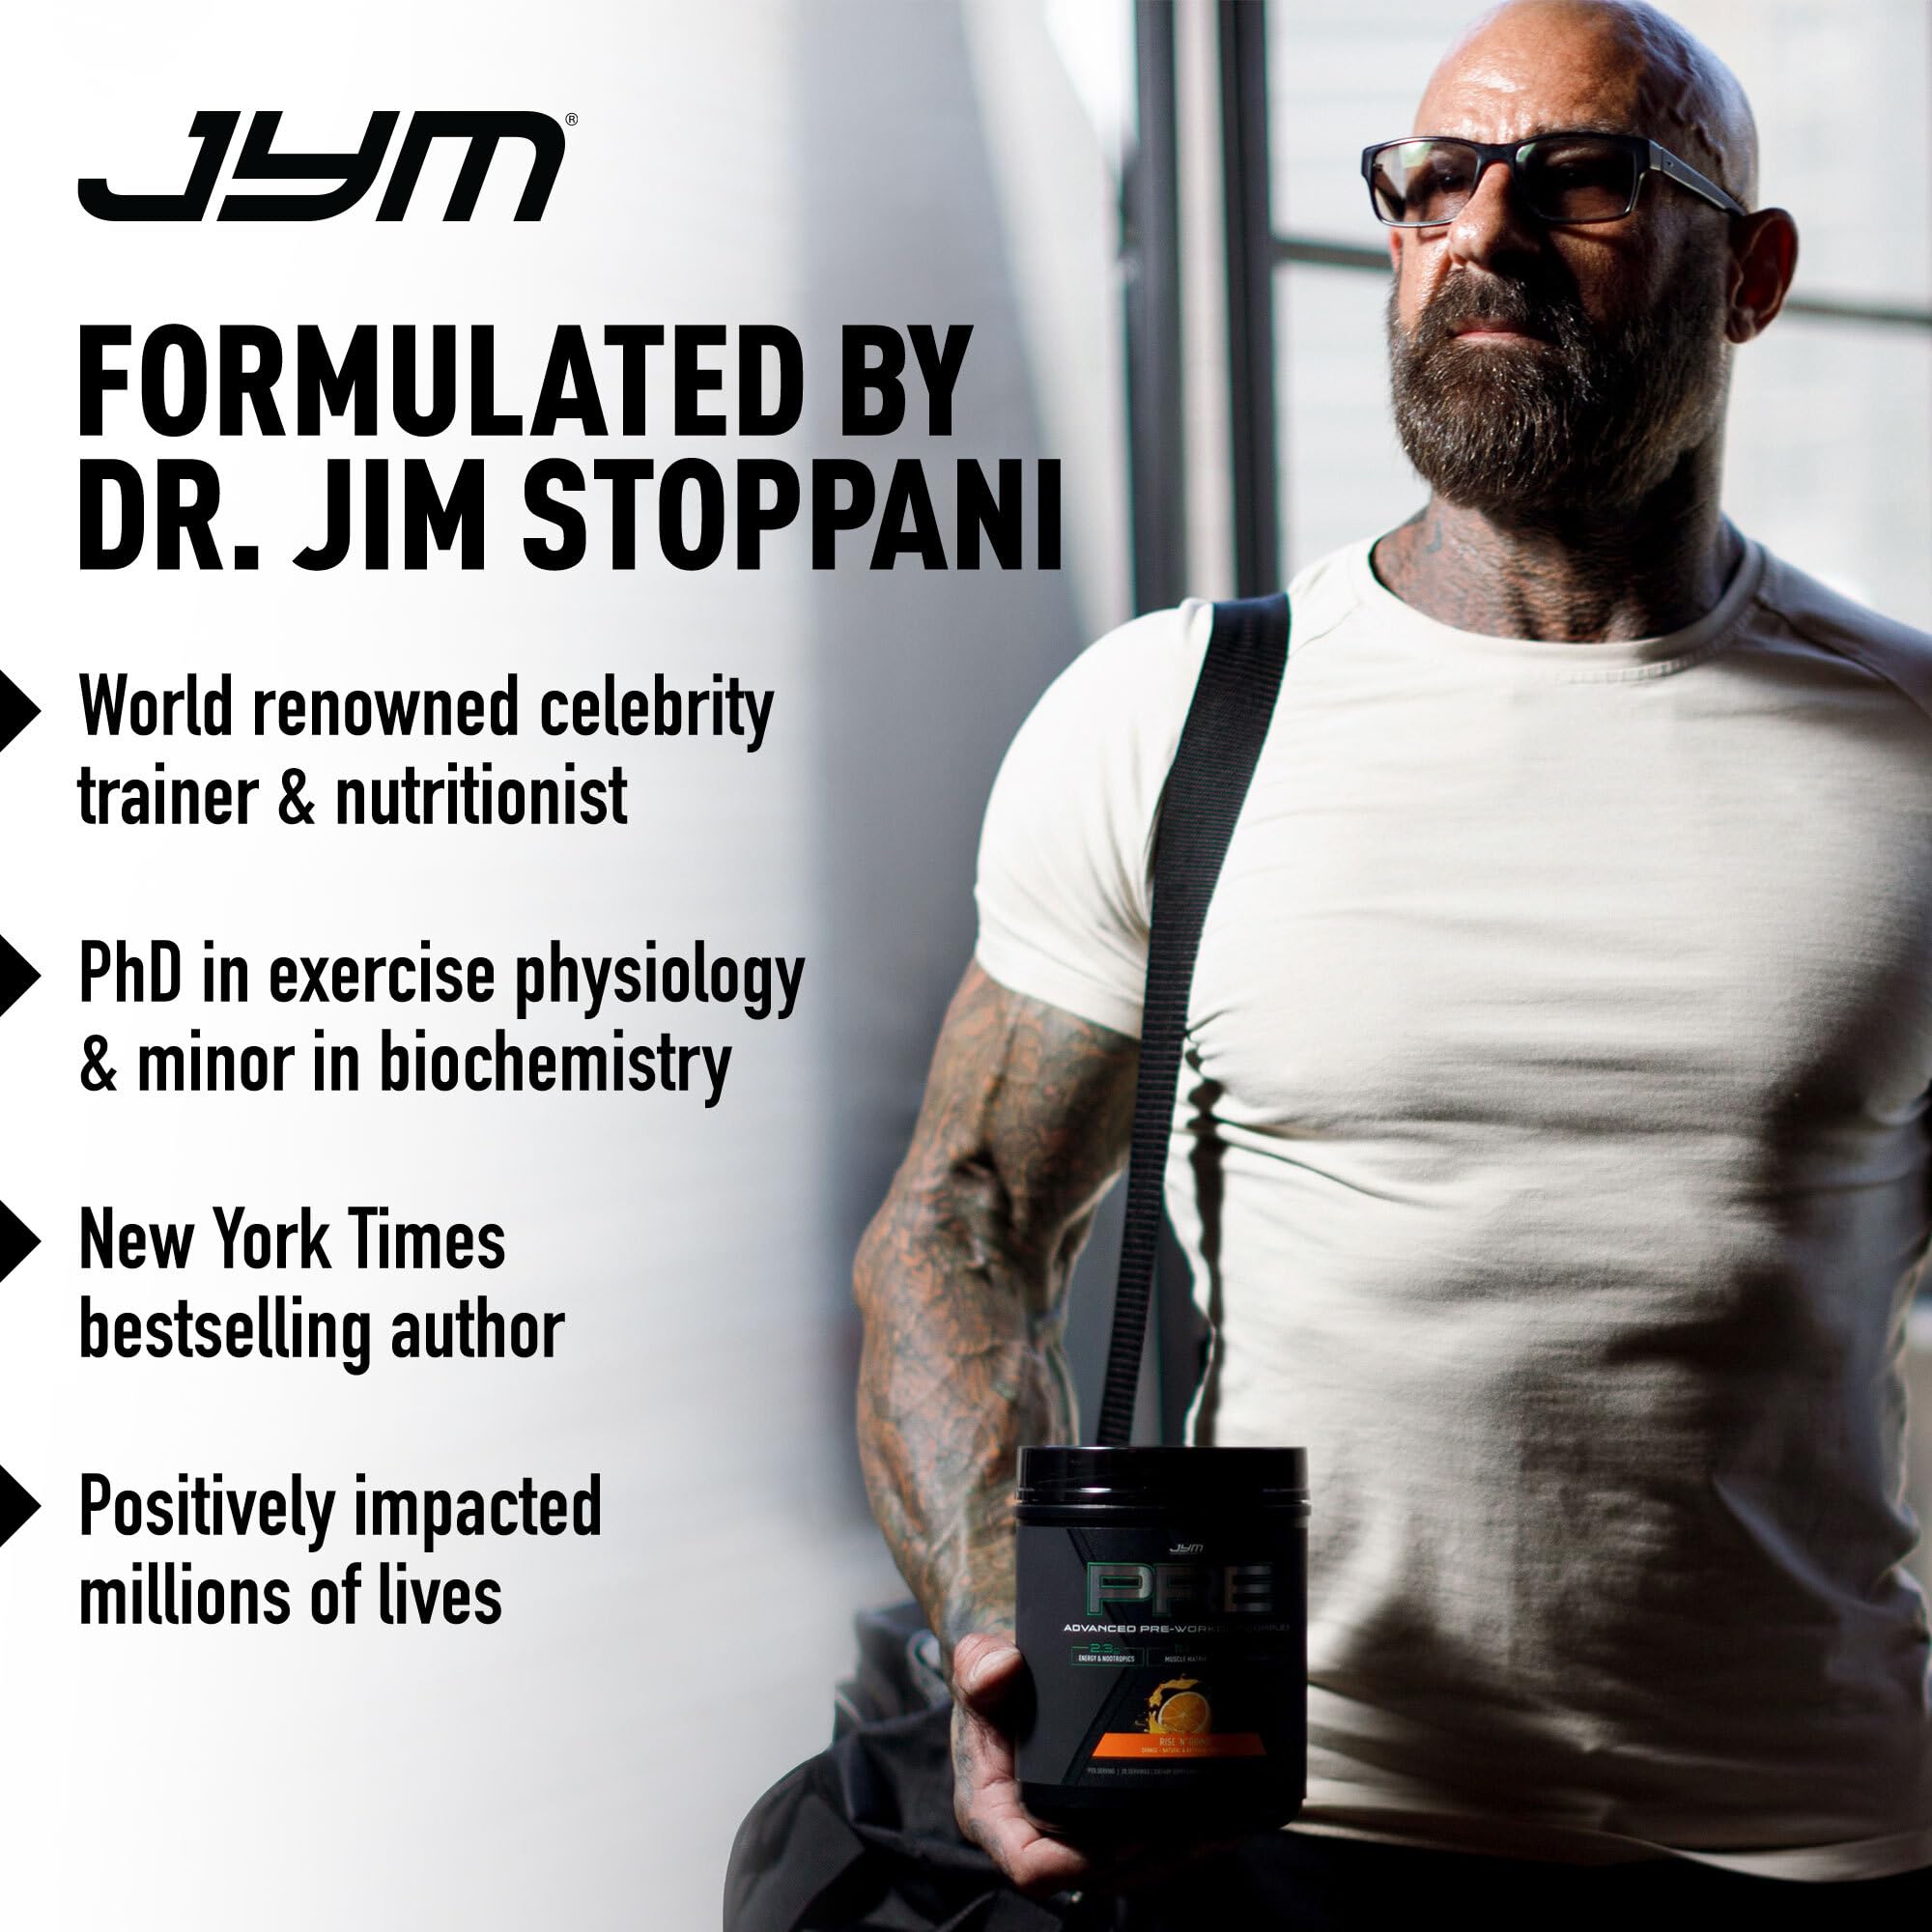 Post JYM Active Matrix - Post-Workout with BCAA's, Glutamine, Creatine HCL, Beta-Alanine, and More | JYM Supplement Science | Fruit Punch, 30 Servings